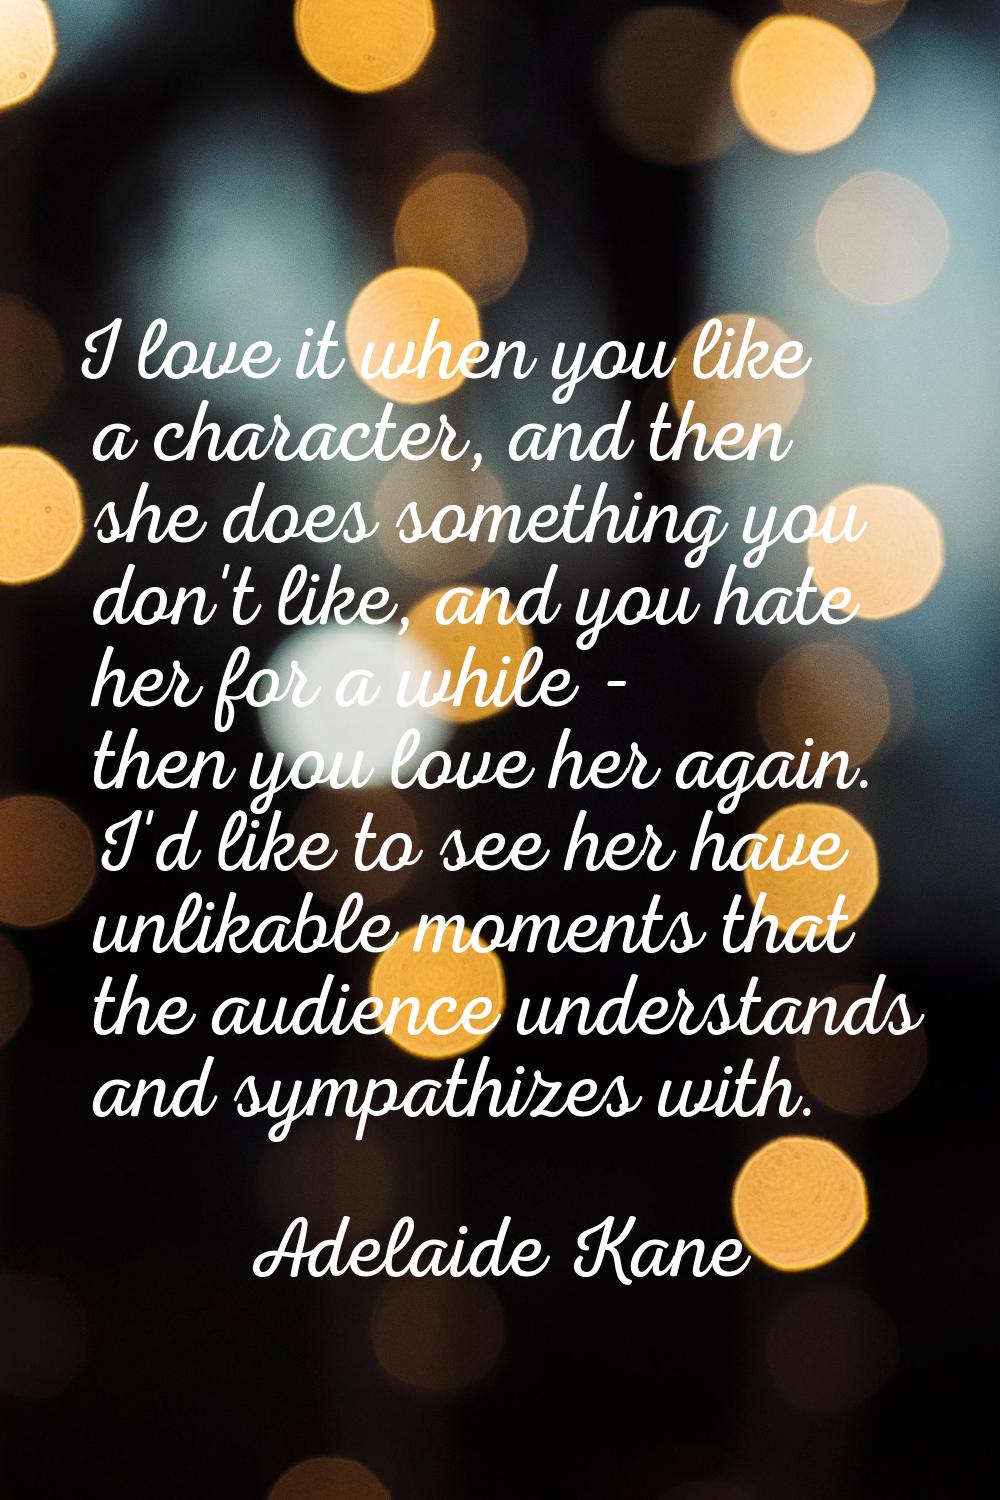 I love it when you like a character, and then she does something you don't like, and you hate her f